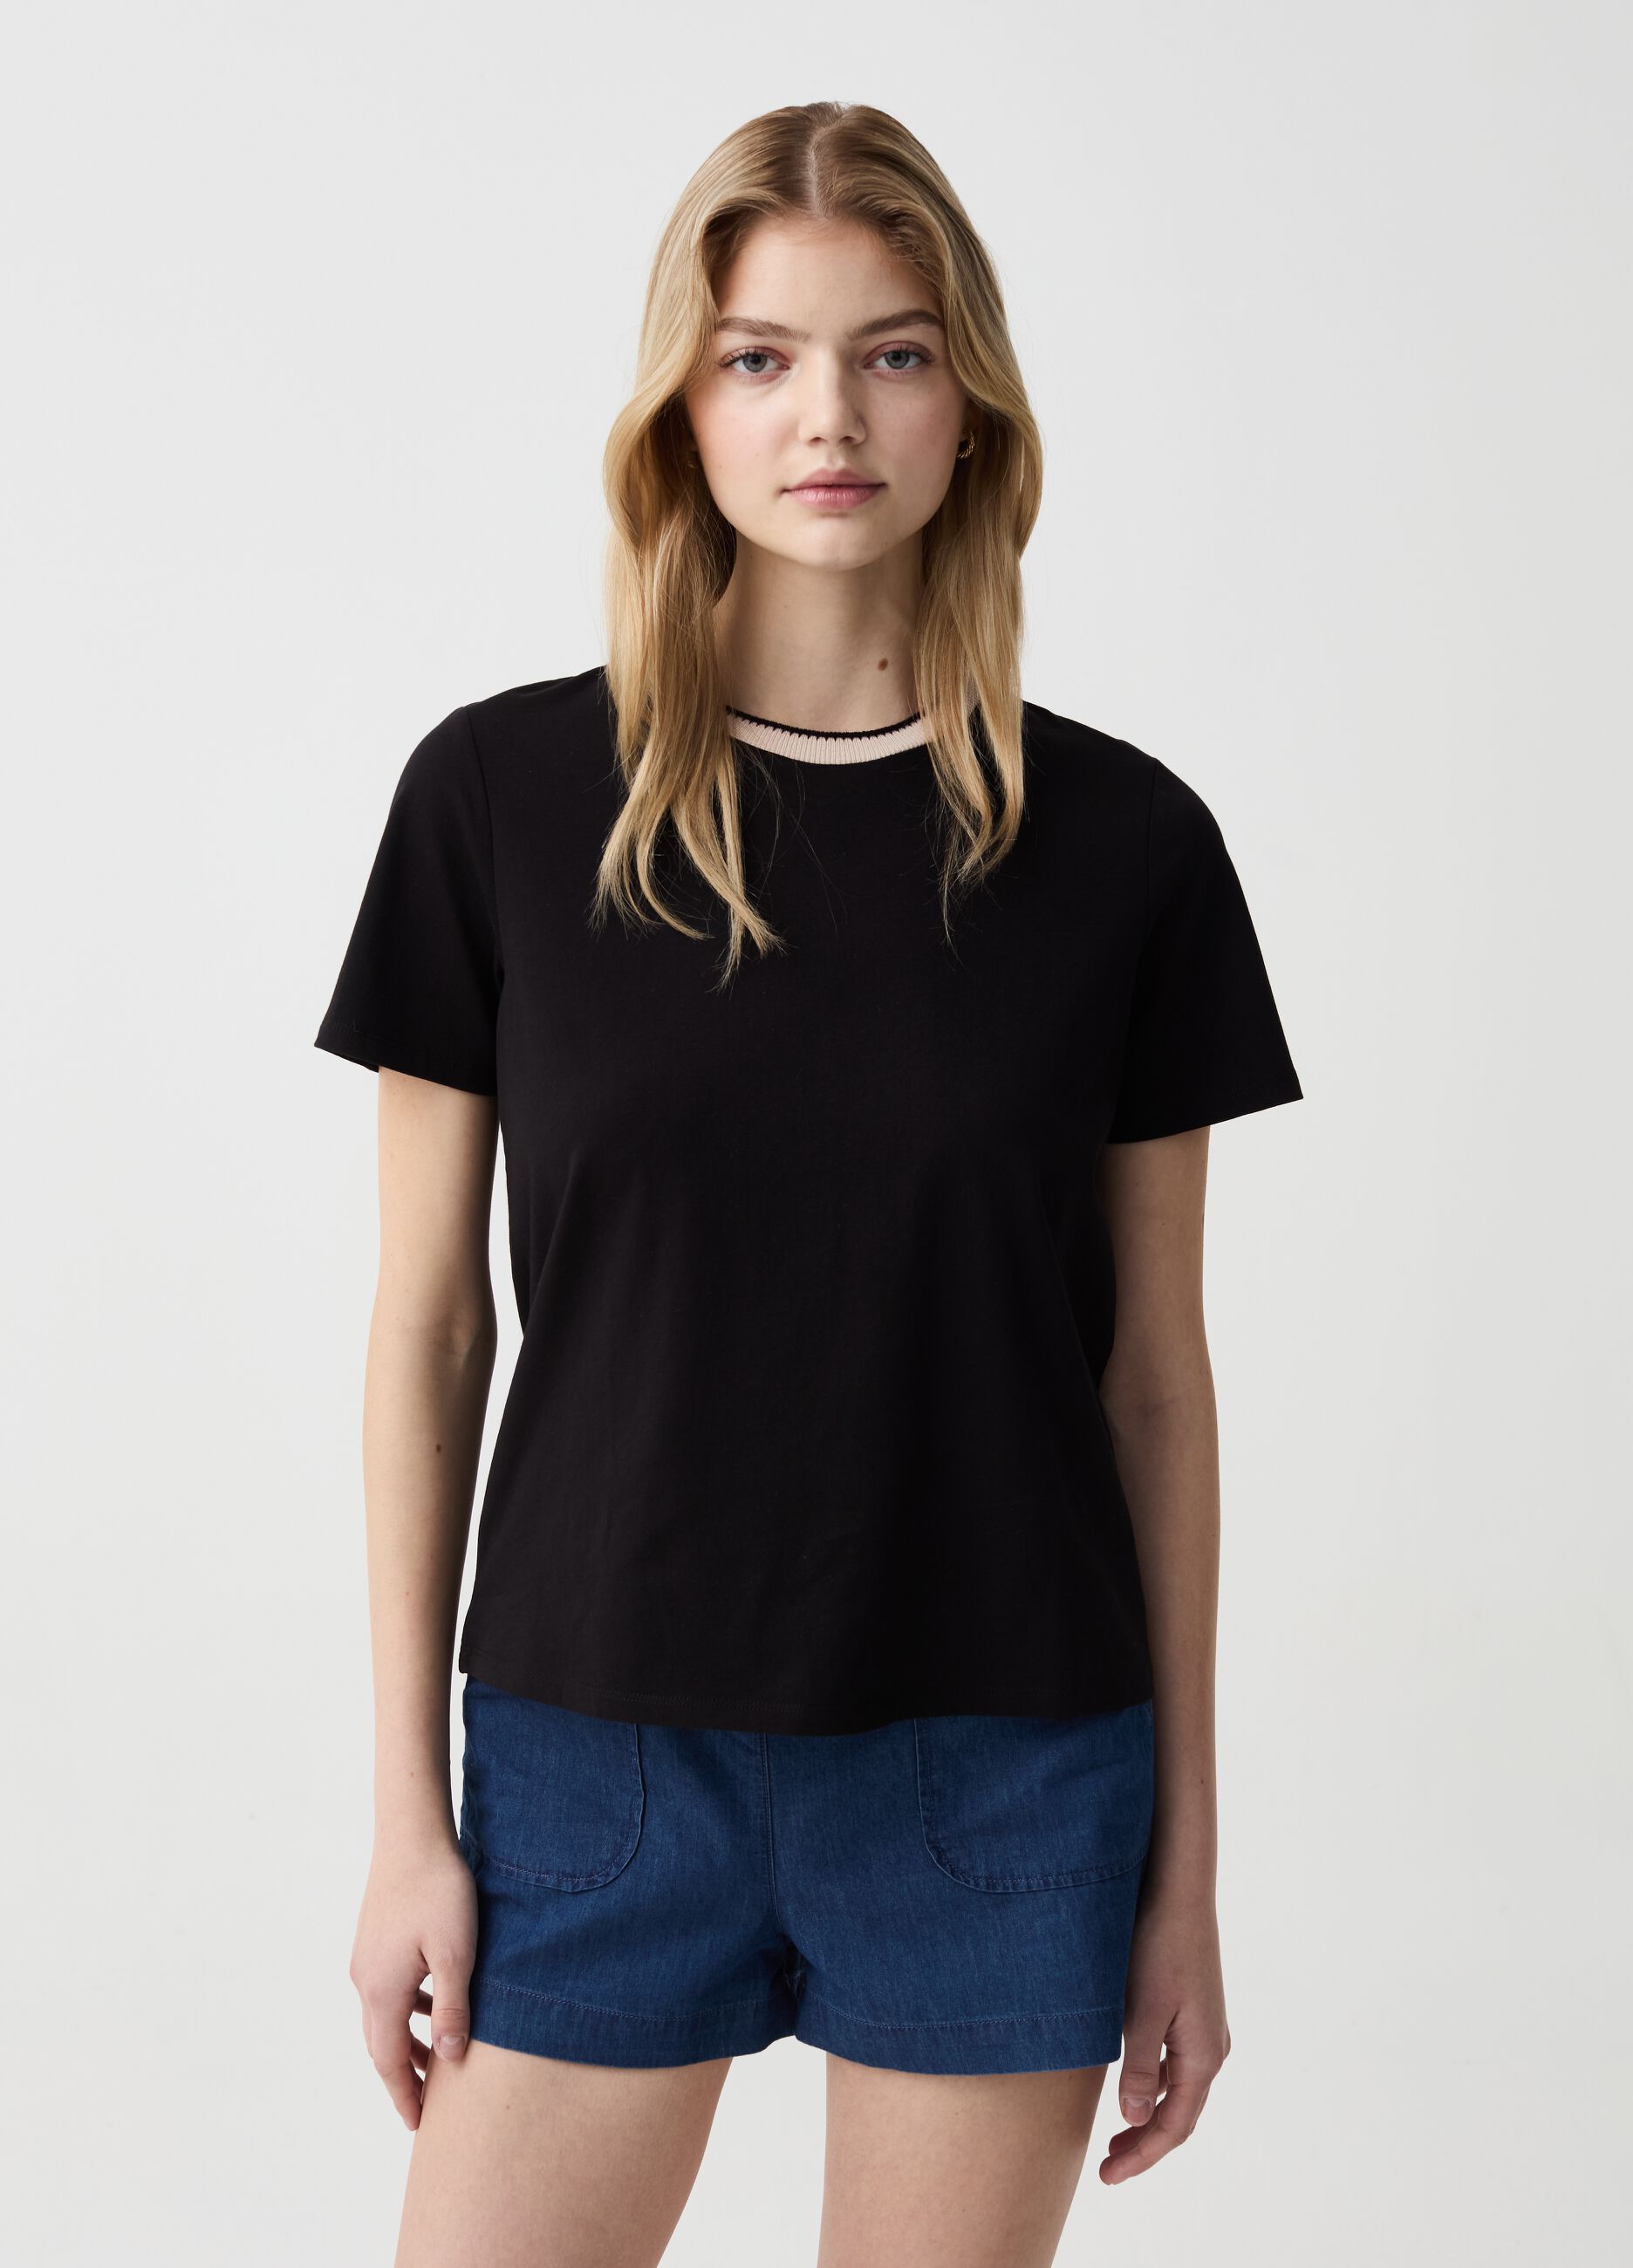 T-shirt with round neck with striped edging